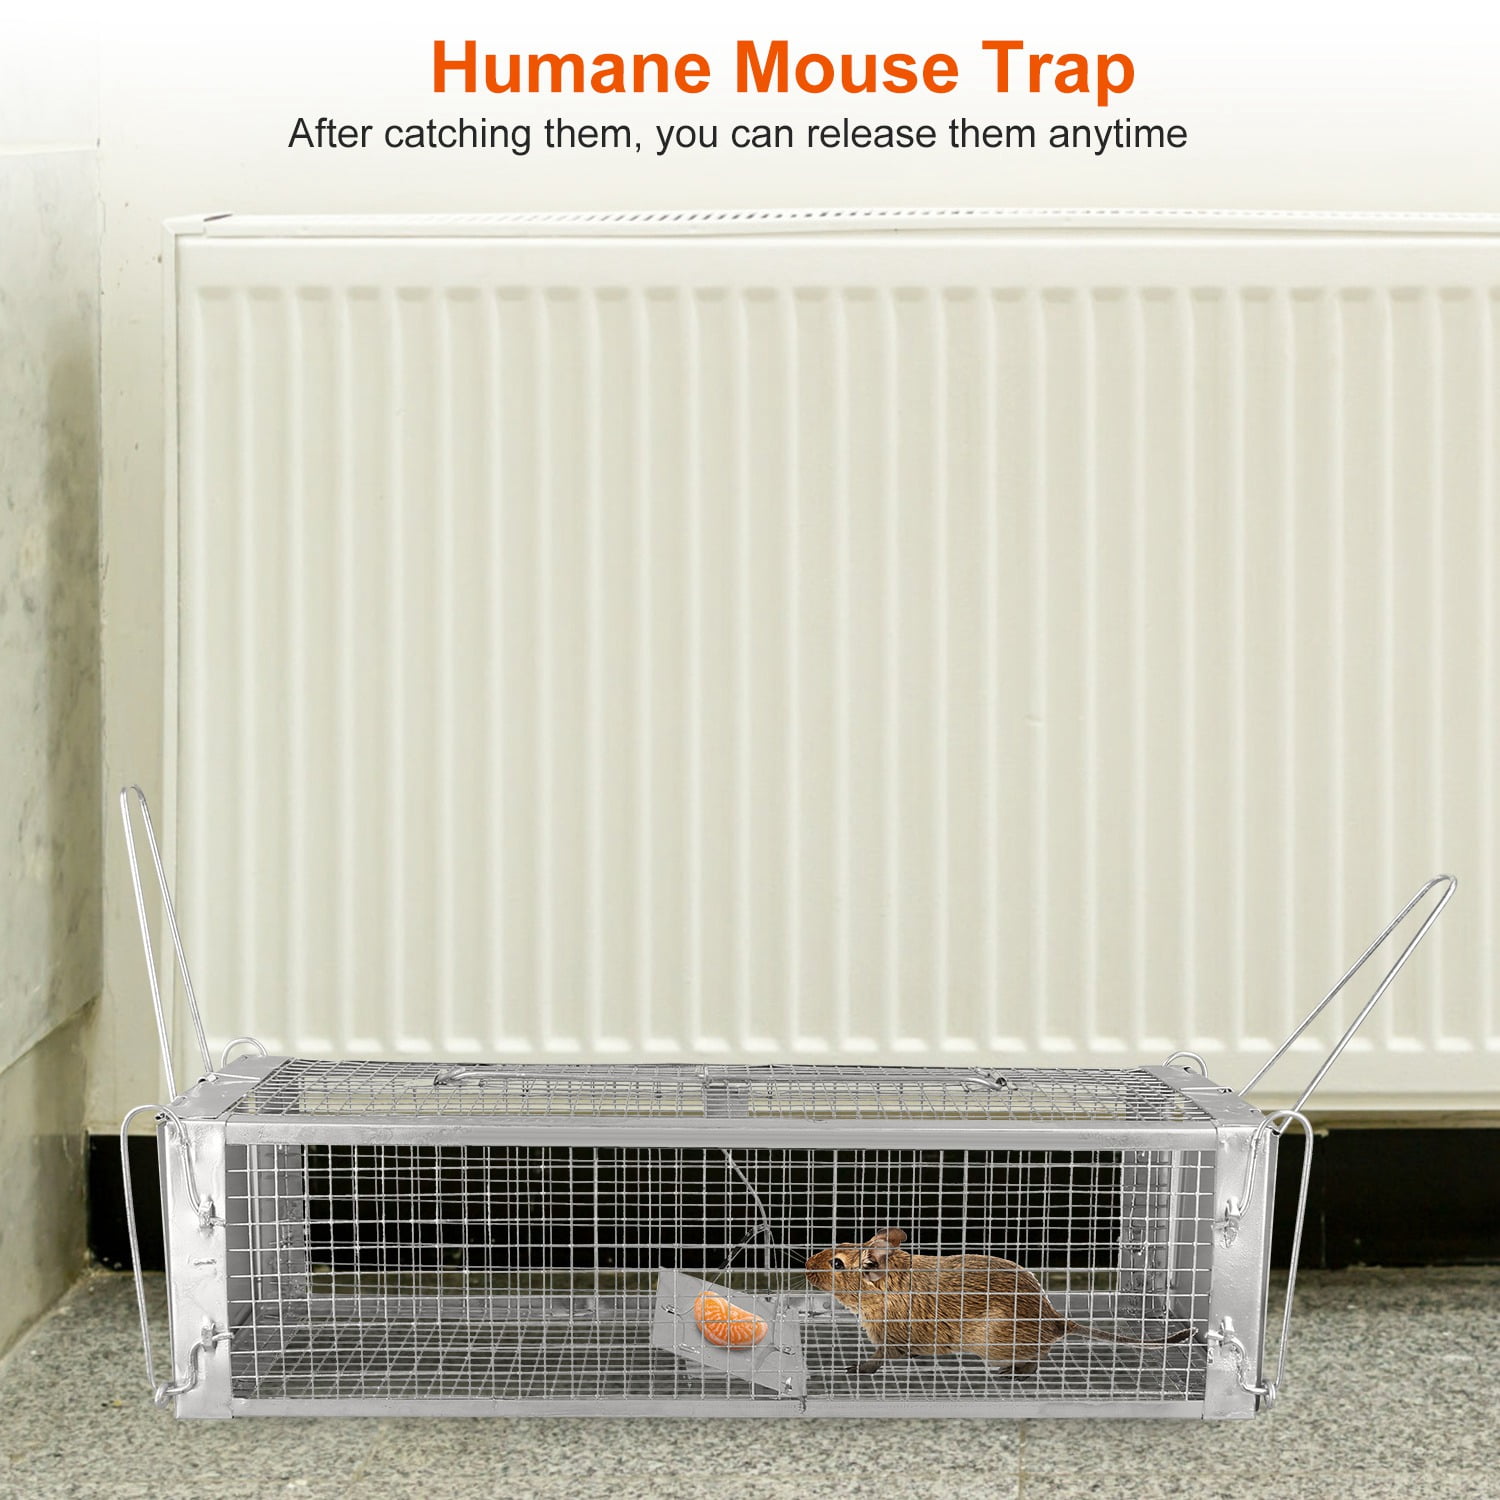  AOK Home Mouse Trap Rat Trap Rodent Trap Live Catch Cage Easy  to Set Up and Reuse 11x6x4.5 inch : Patio, Lawn & Garden